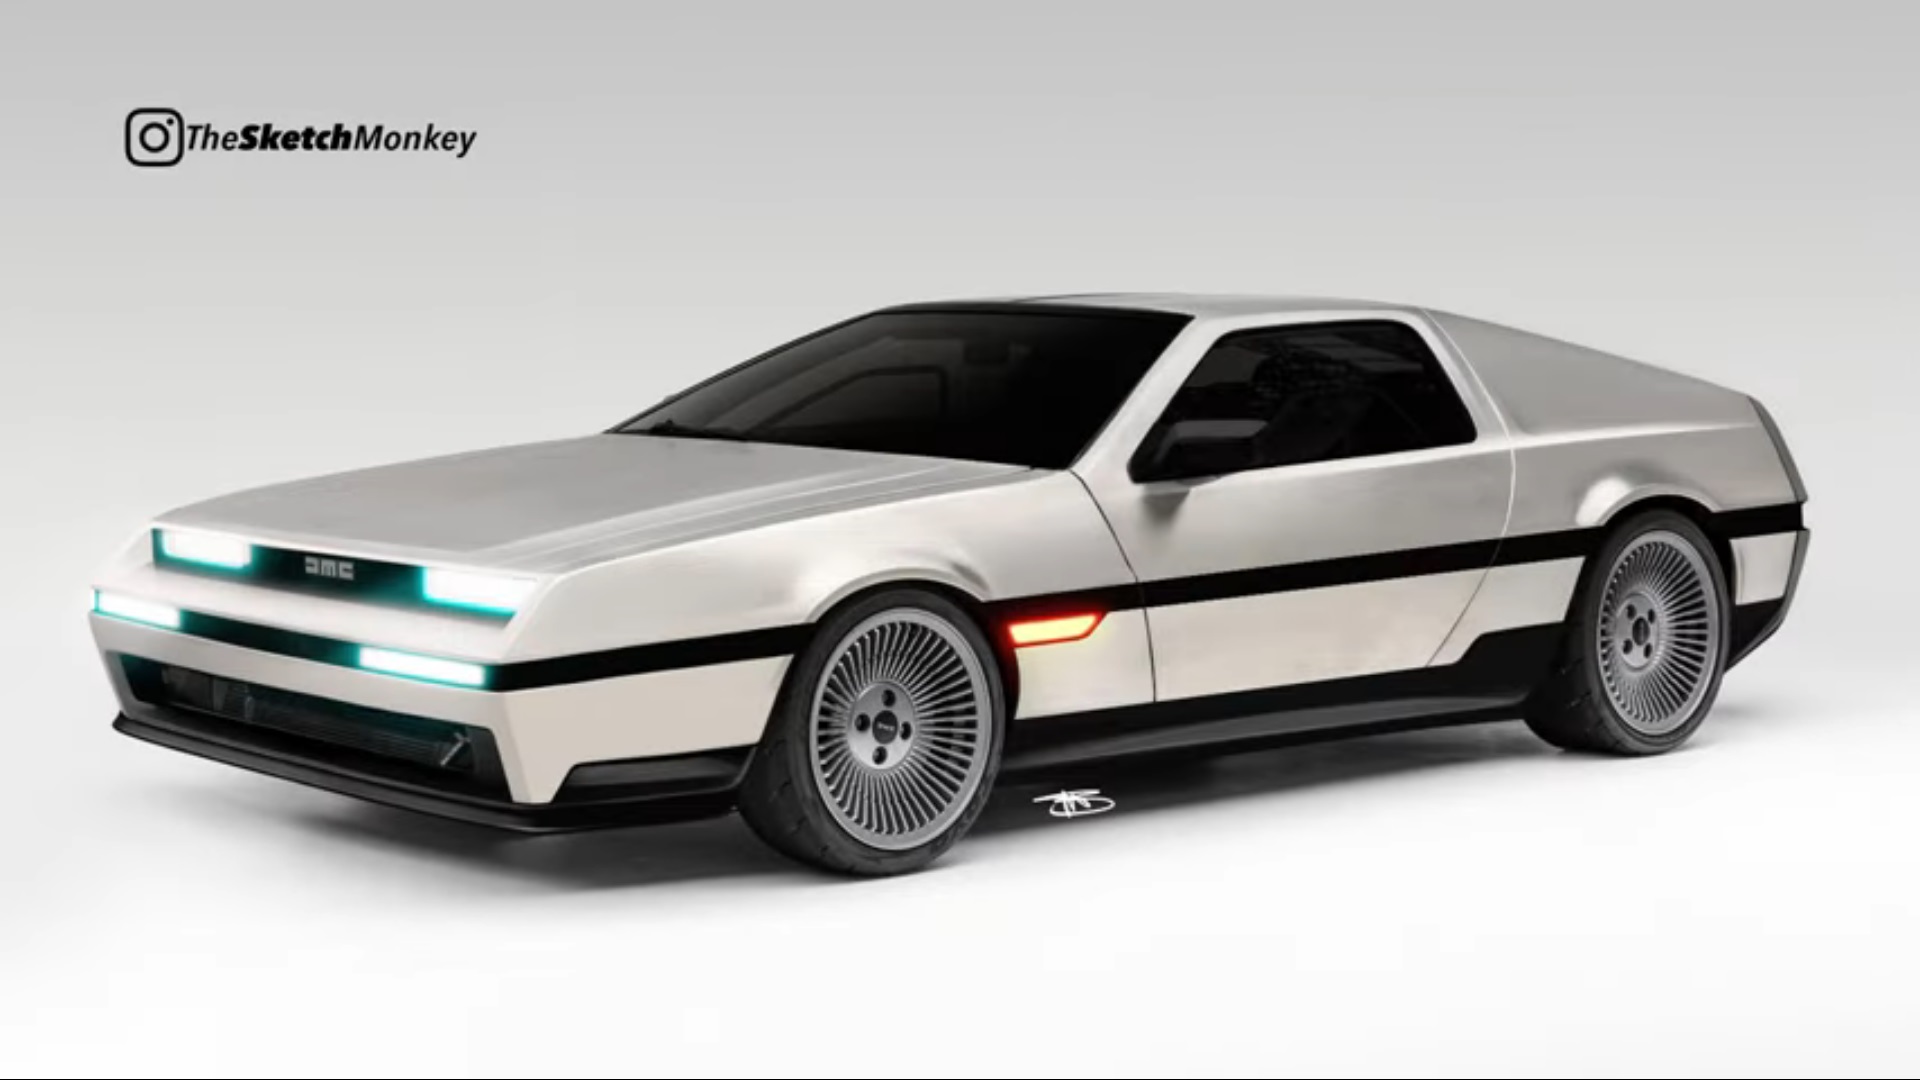 What Happened to the DeLorean?